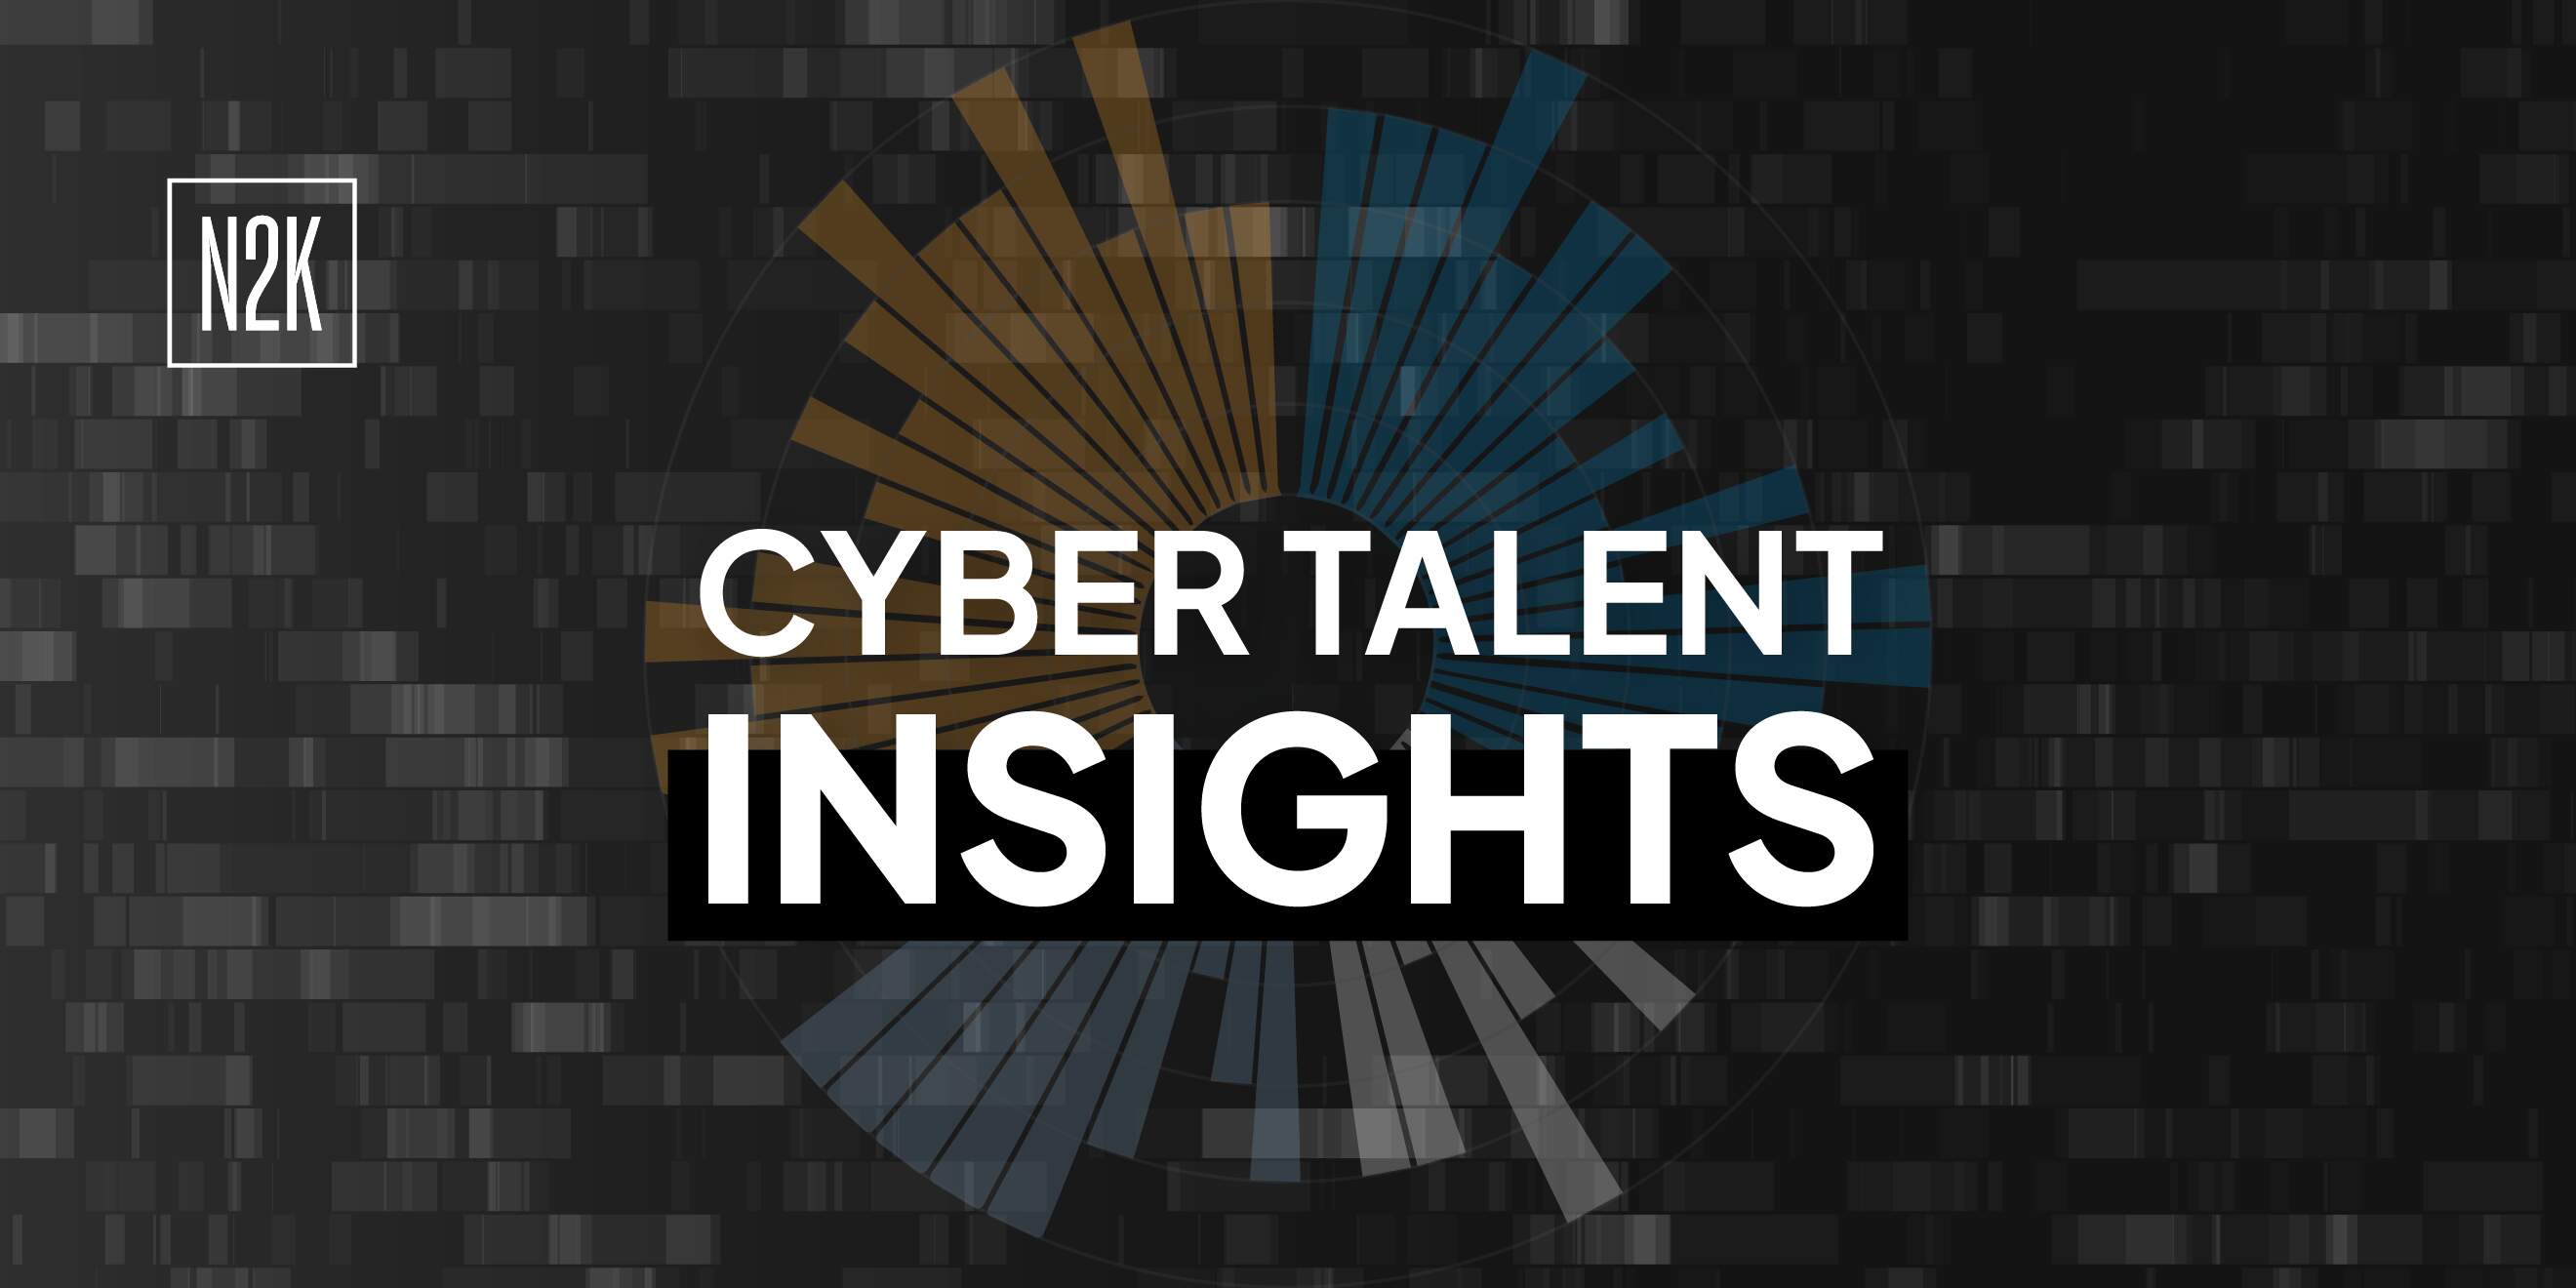 Cyber Talent Insights: Charting your path in cybersecurity. (Part 2 of 3)